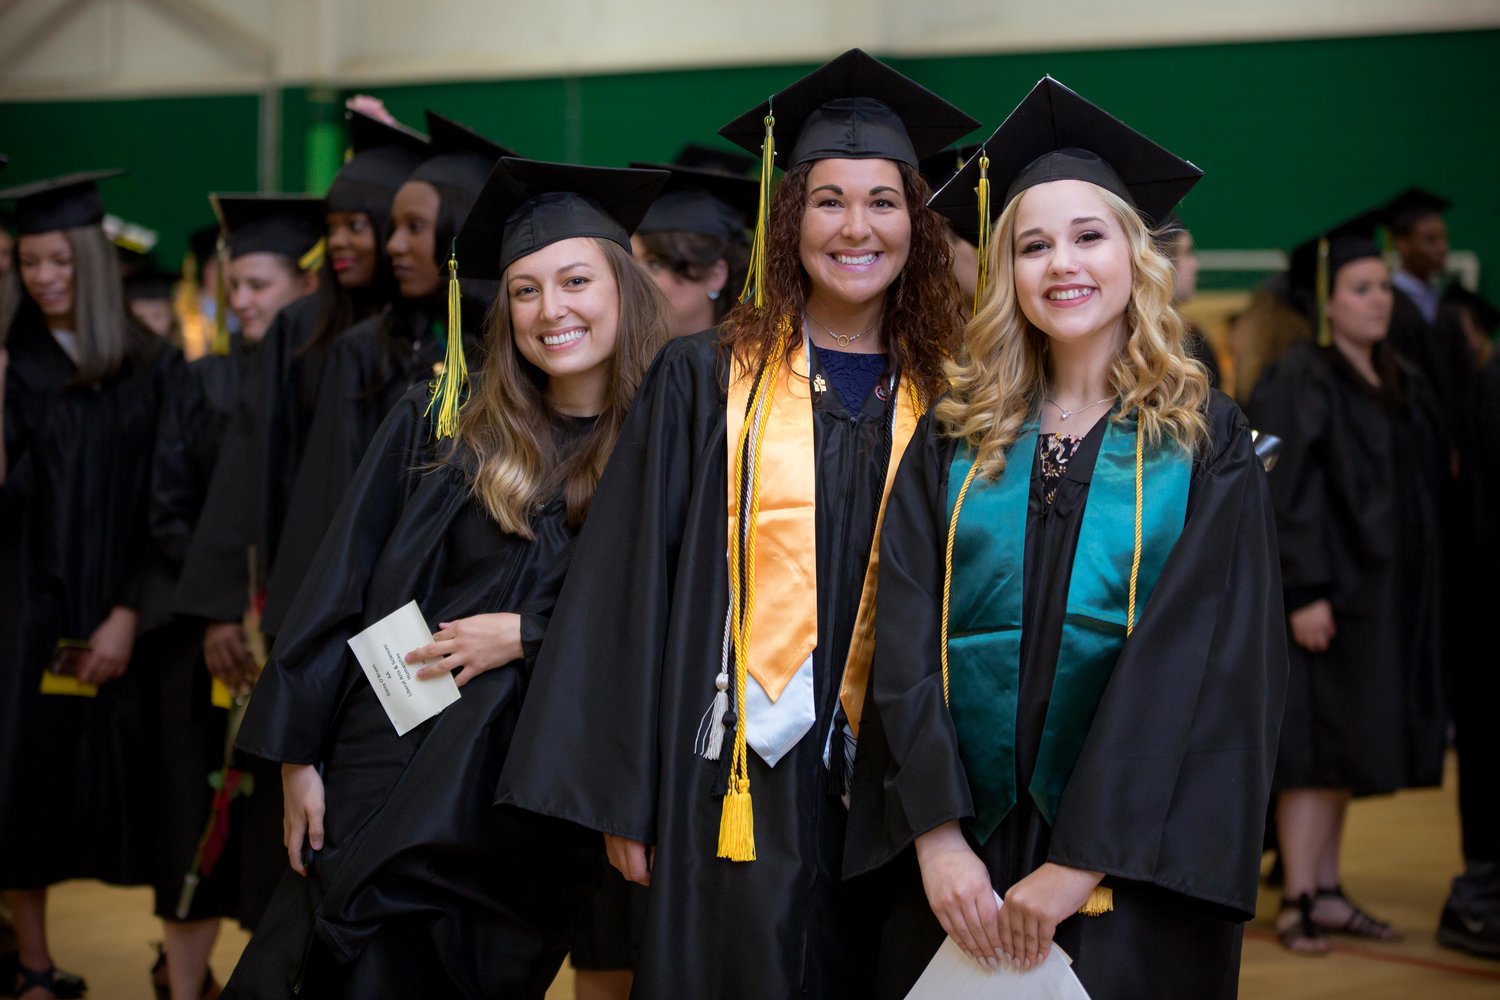 Learn how you could attend SUNY Sullivan at little or no cost.